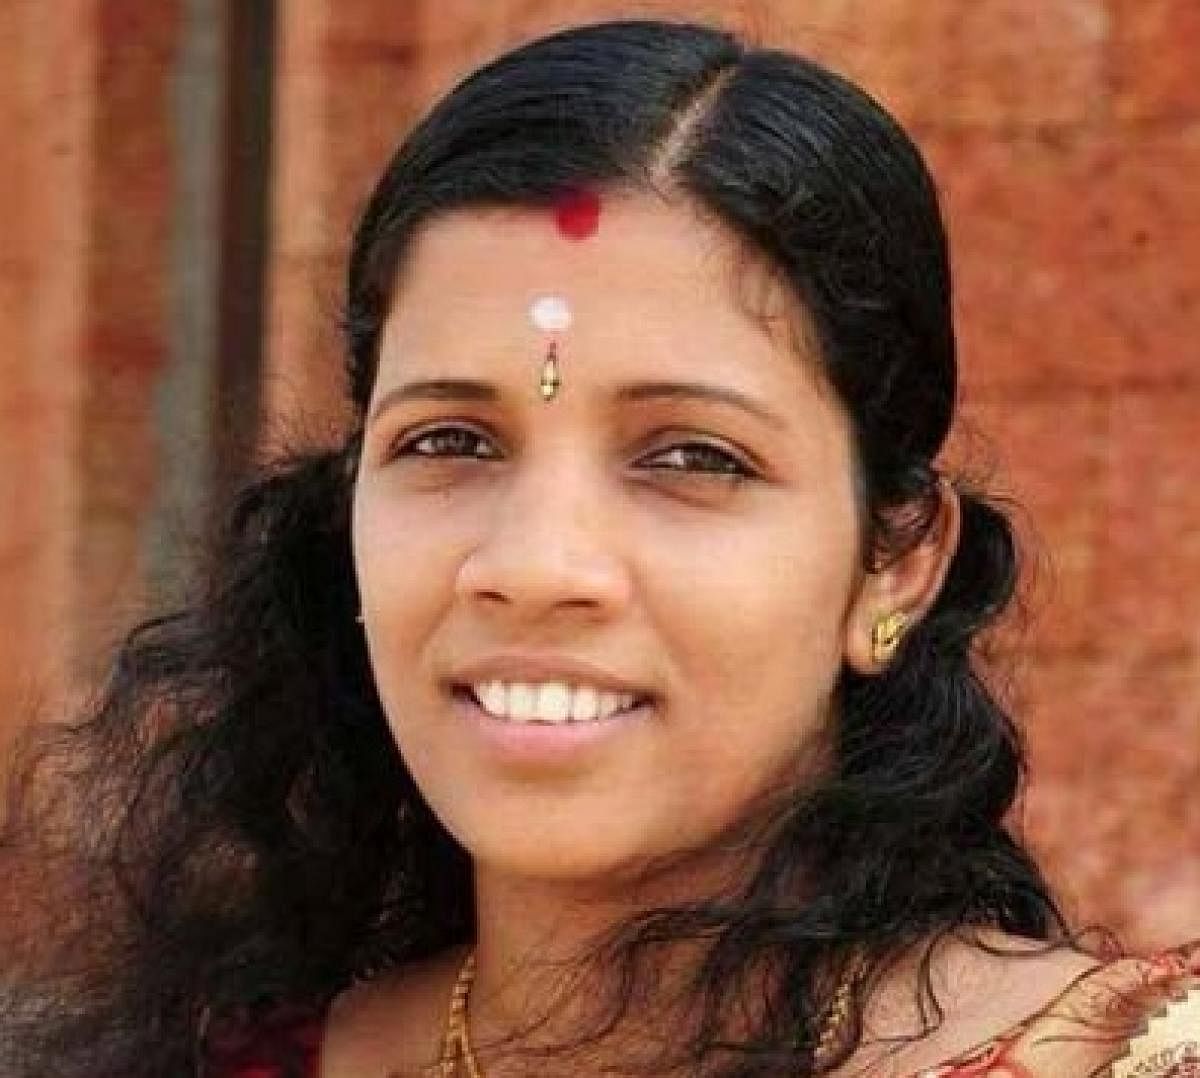 The Kerala government has announced to give a job to her husband and financial assistance of Rs 10 lakh each for her two sons.